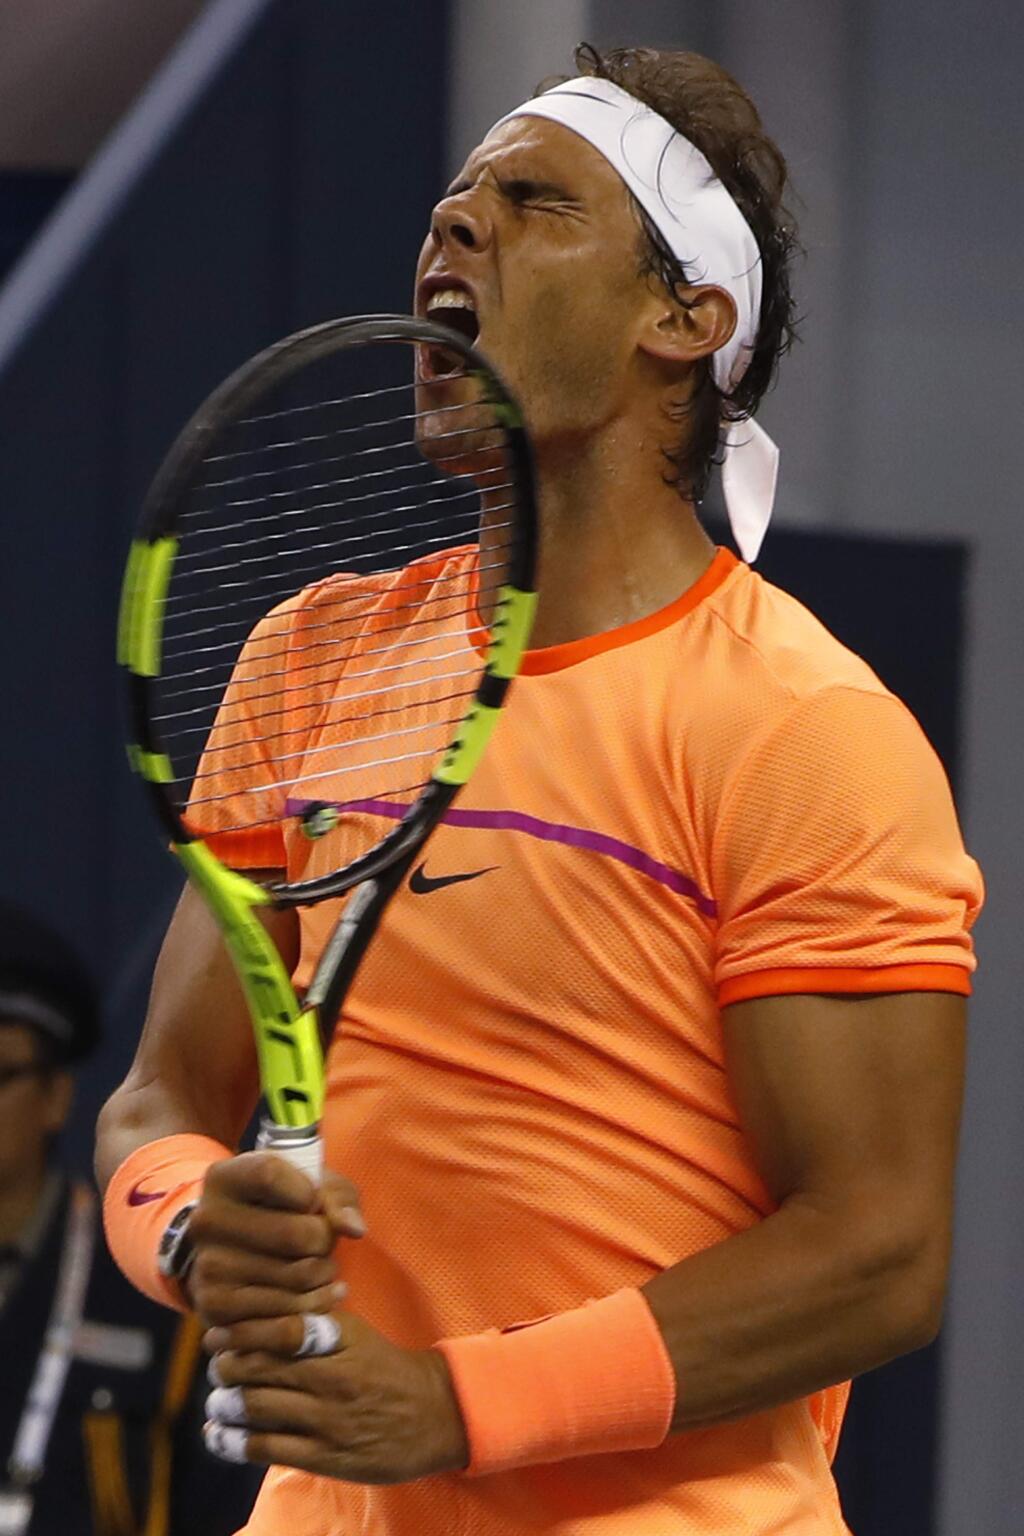 Rafael Nadal of Spain reacts after losing a point to Viktor Troicki of Serbia during the men's singles match of the Shanghai Masters tennis tournament at Qizhong Forest Sports City Tennis Center in Shanghai, China, Wednesday, Oct. 12, 2016. (AP Photo/Andy Wong)